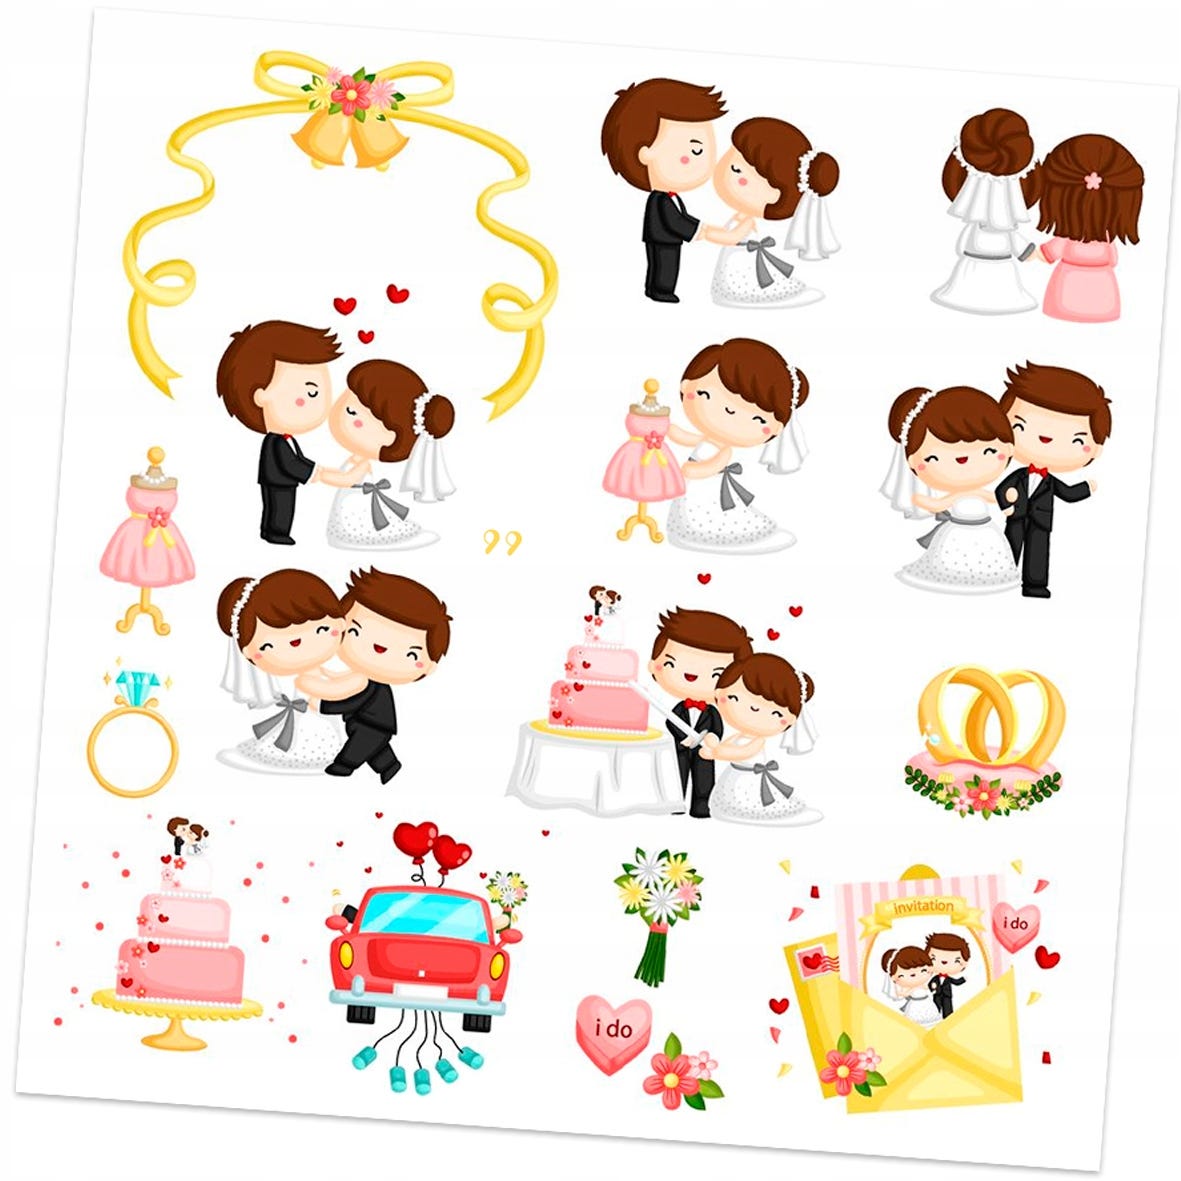 Are The Rules of Wedding Stickers, by Lucaswilliams